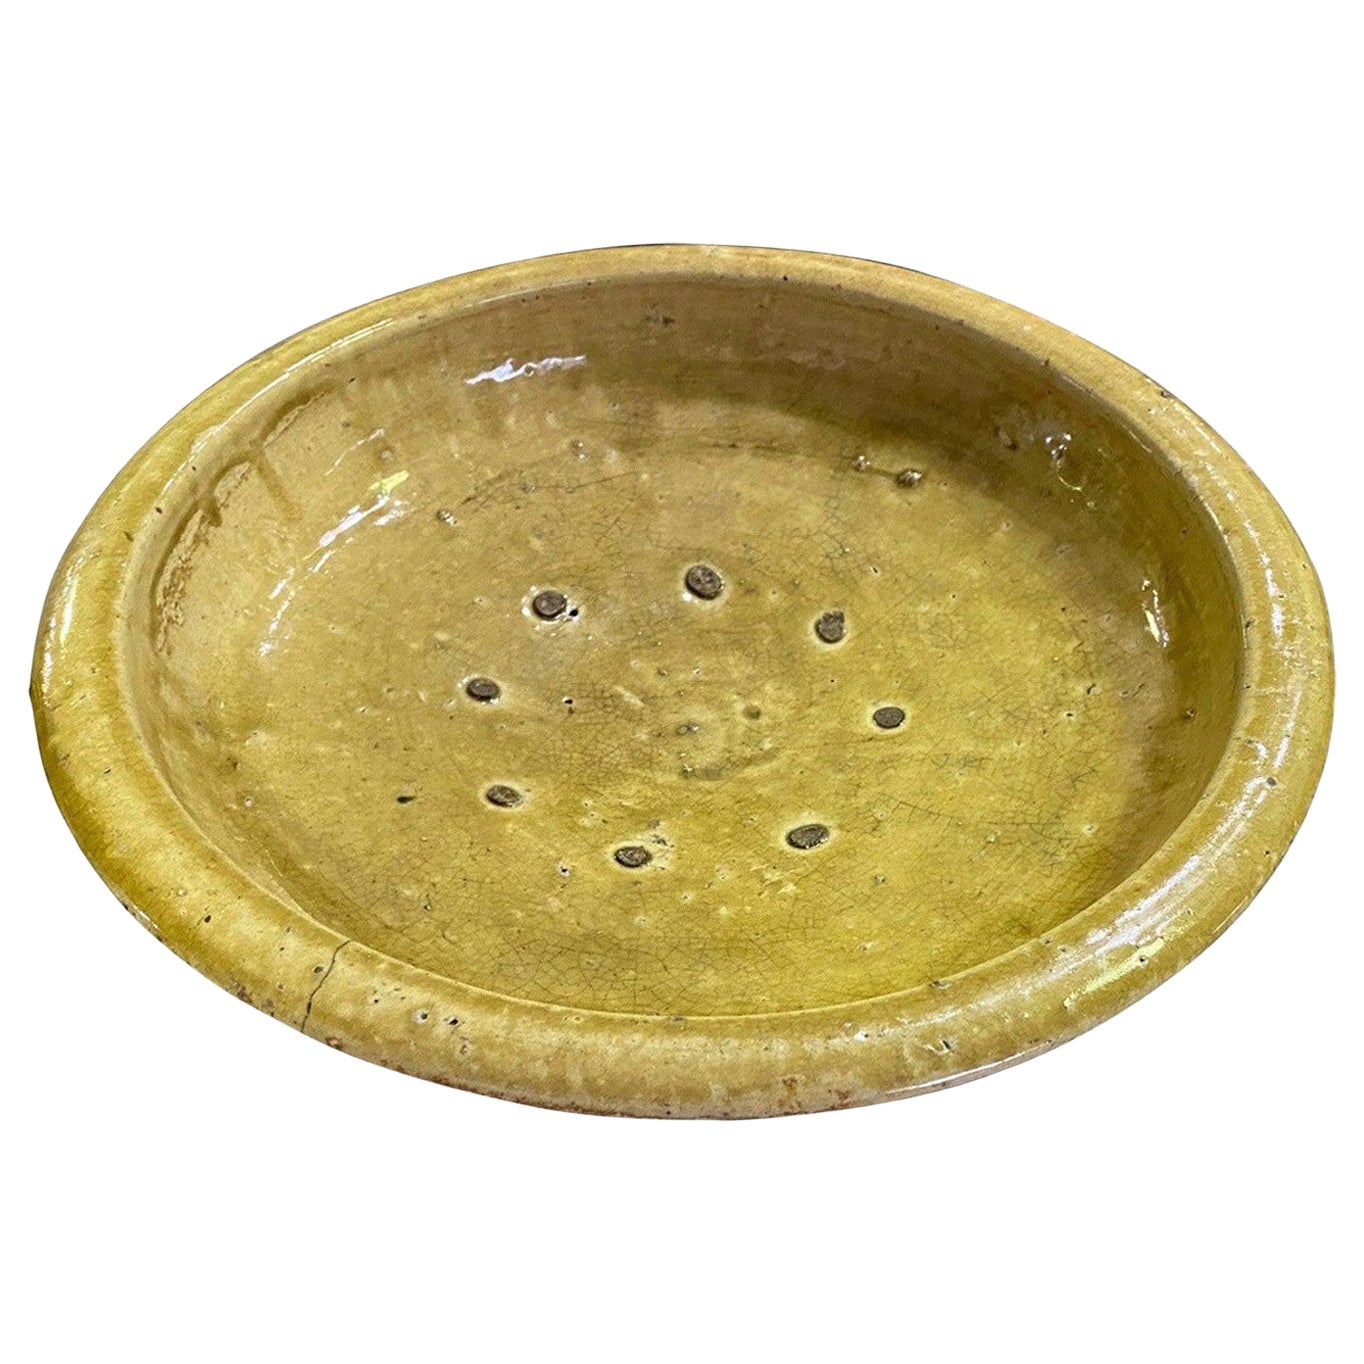 Chinese Celadon Large Heavy Yellow Glazed Footed Bowl, Qing Dynasty